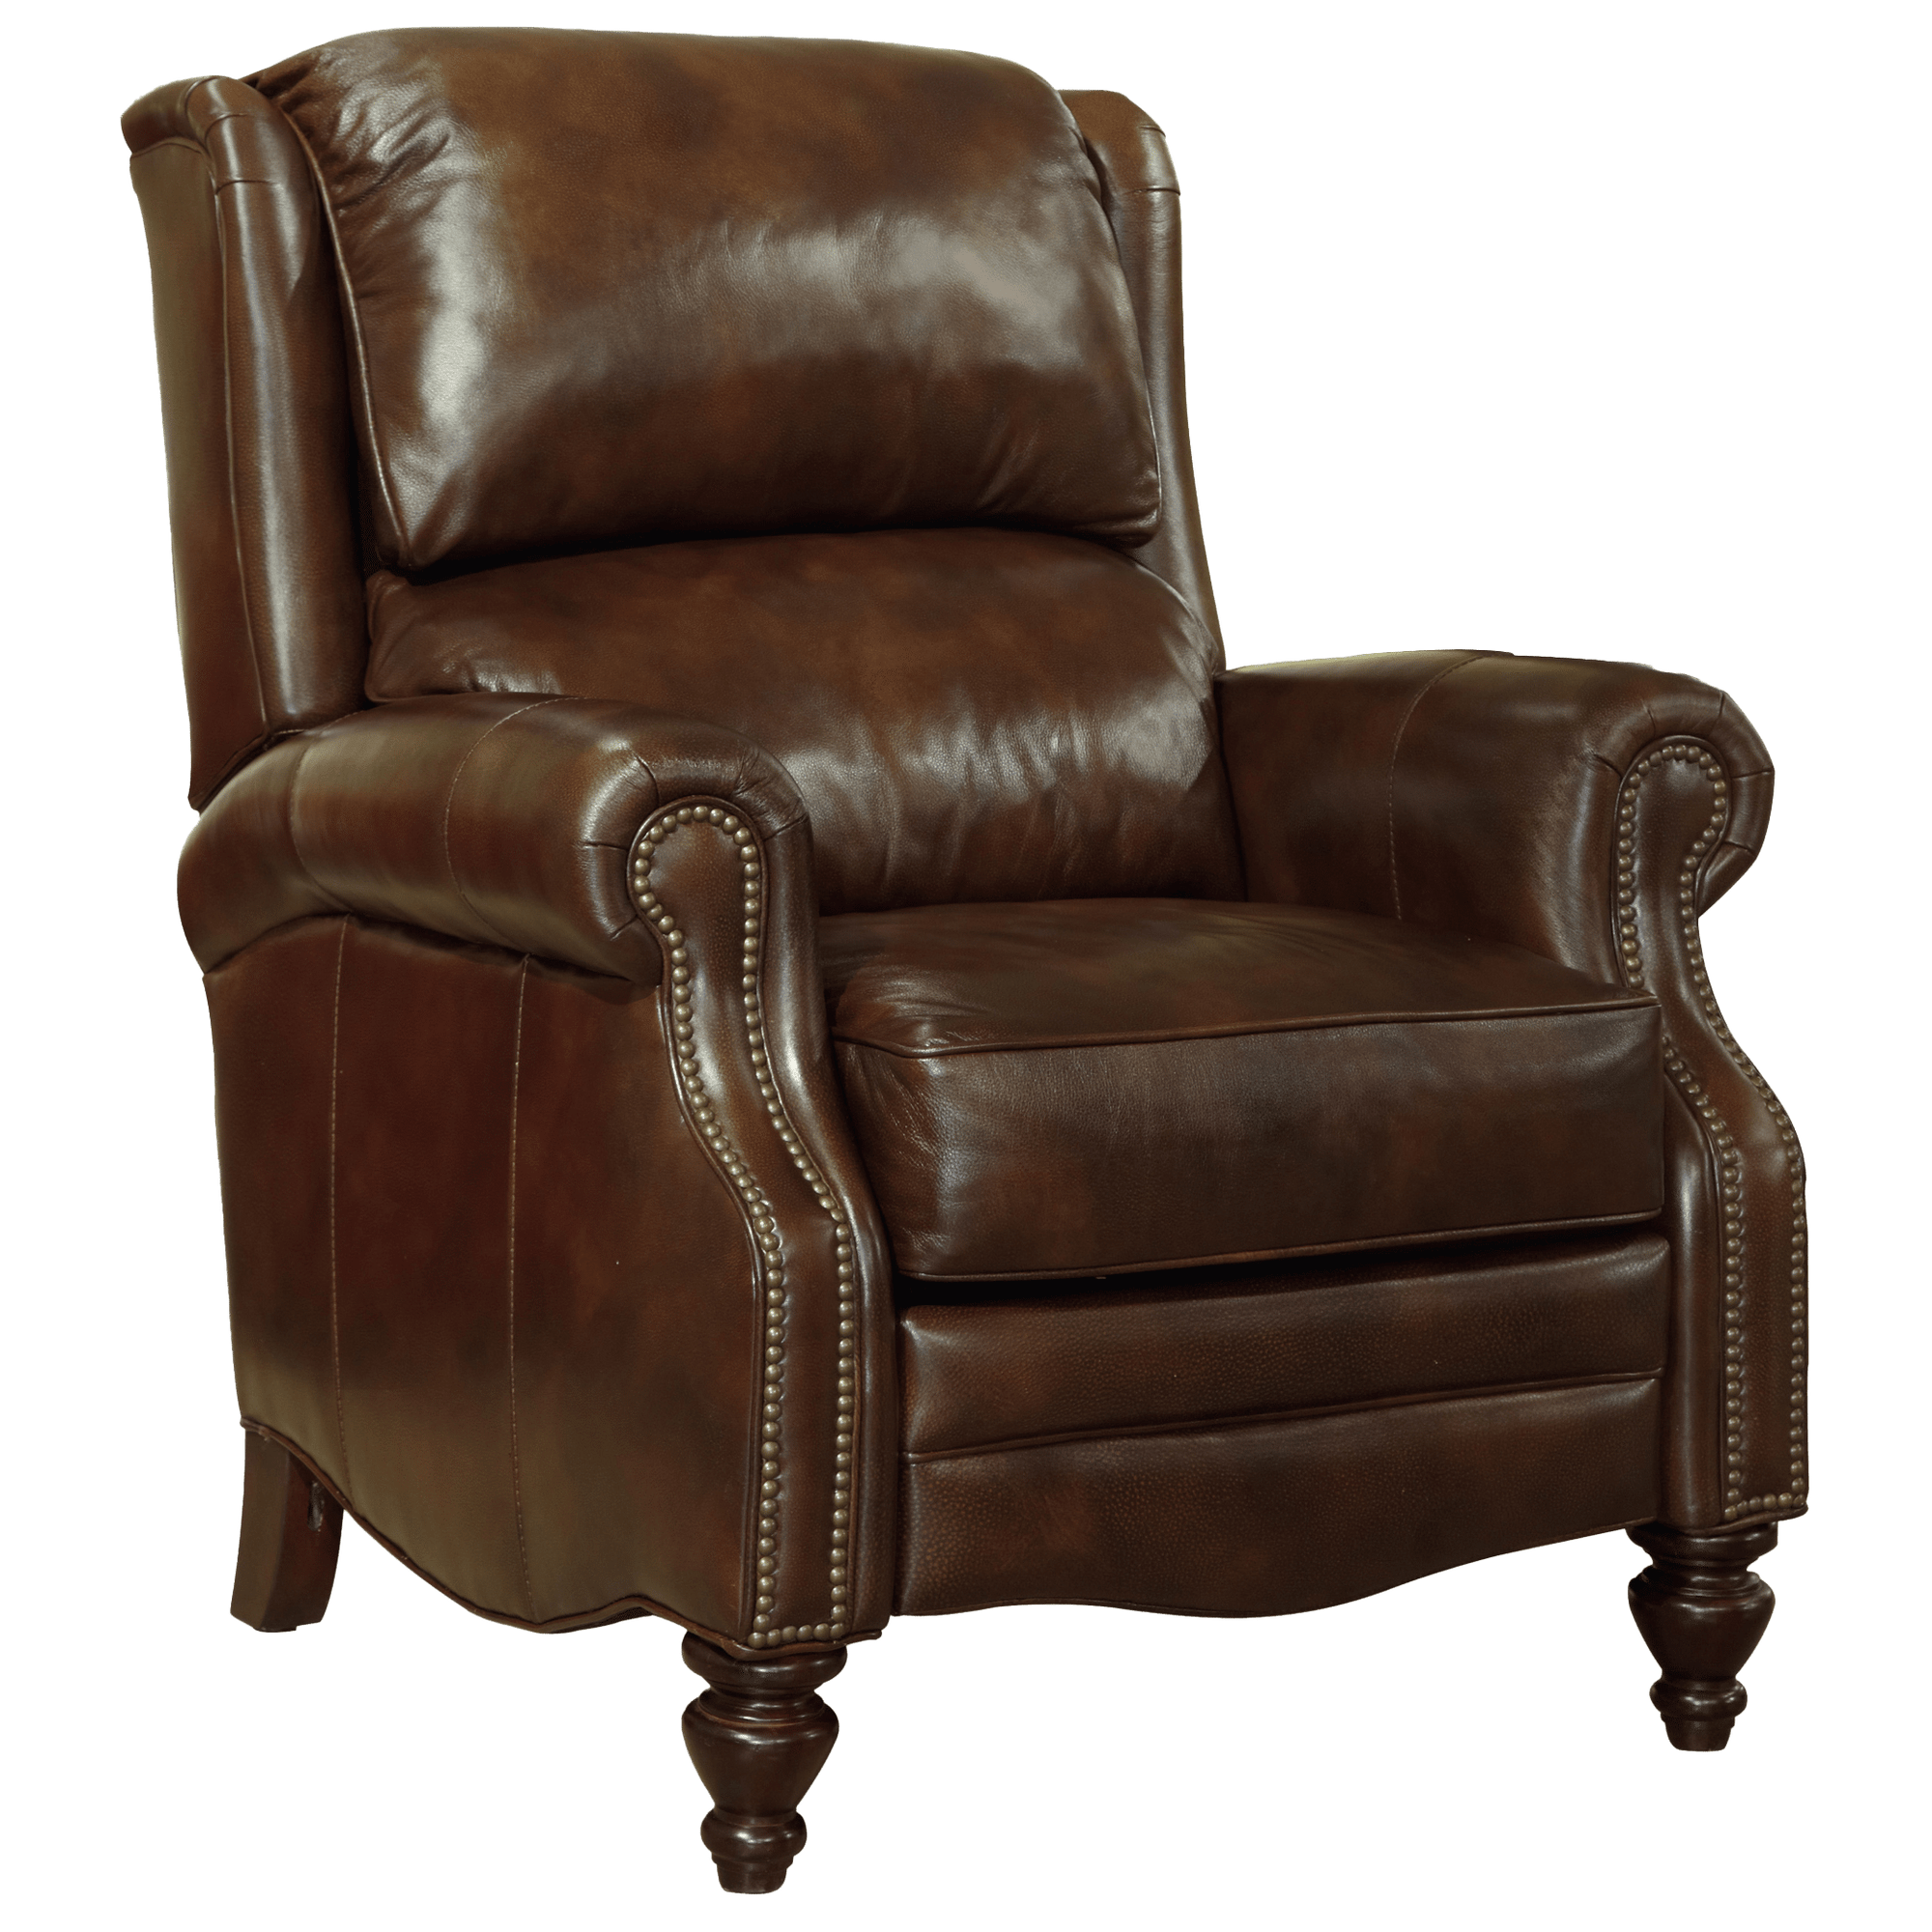 Ciarin Recliner Chair, Leather, Brown - Coja